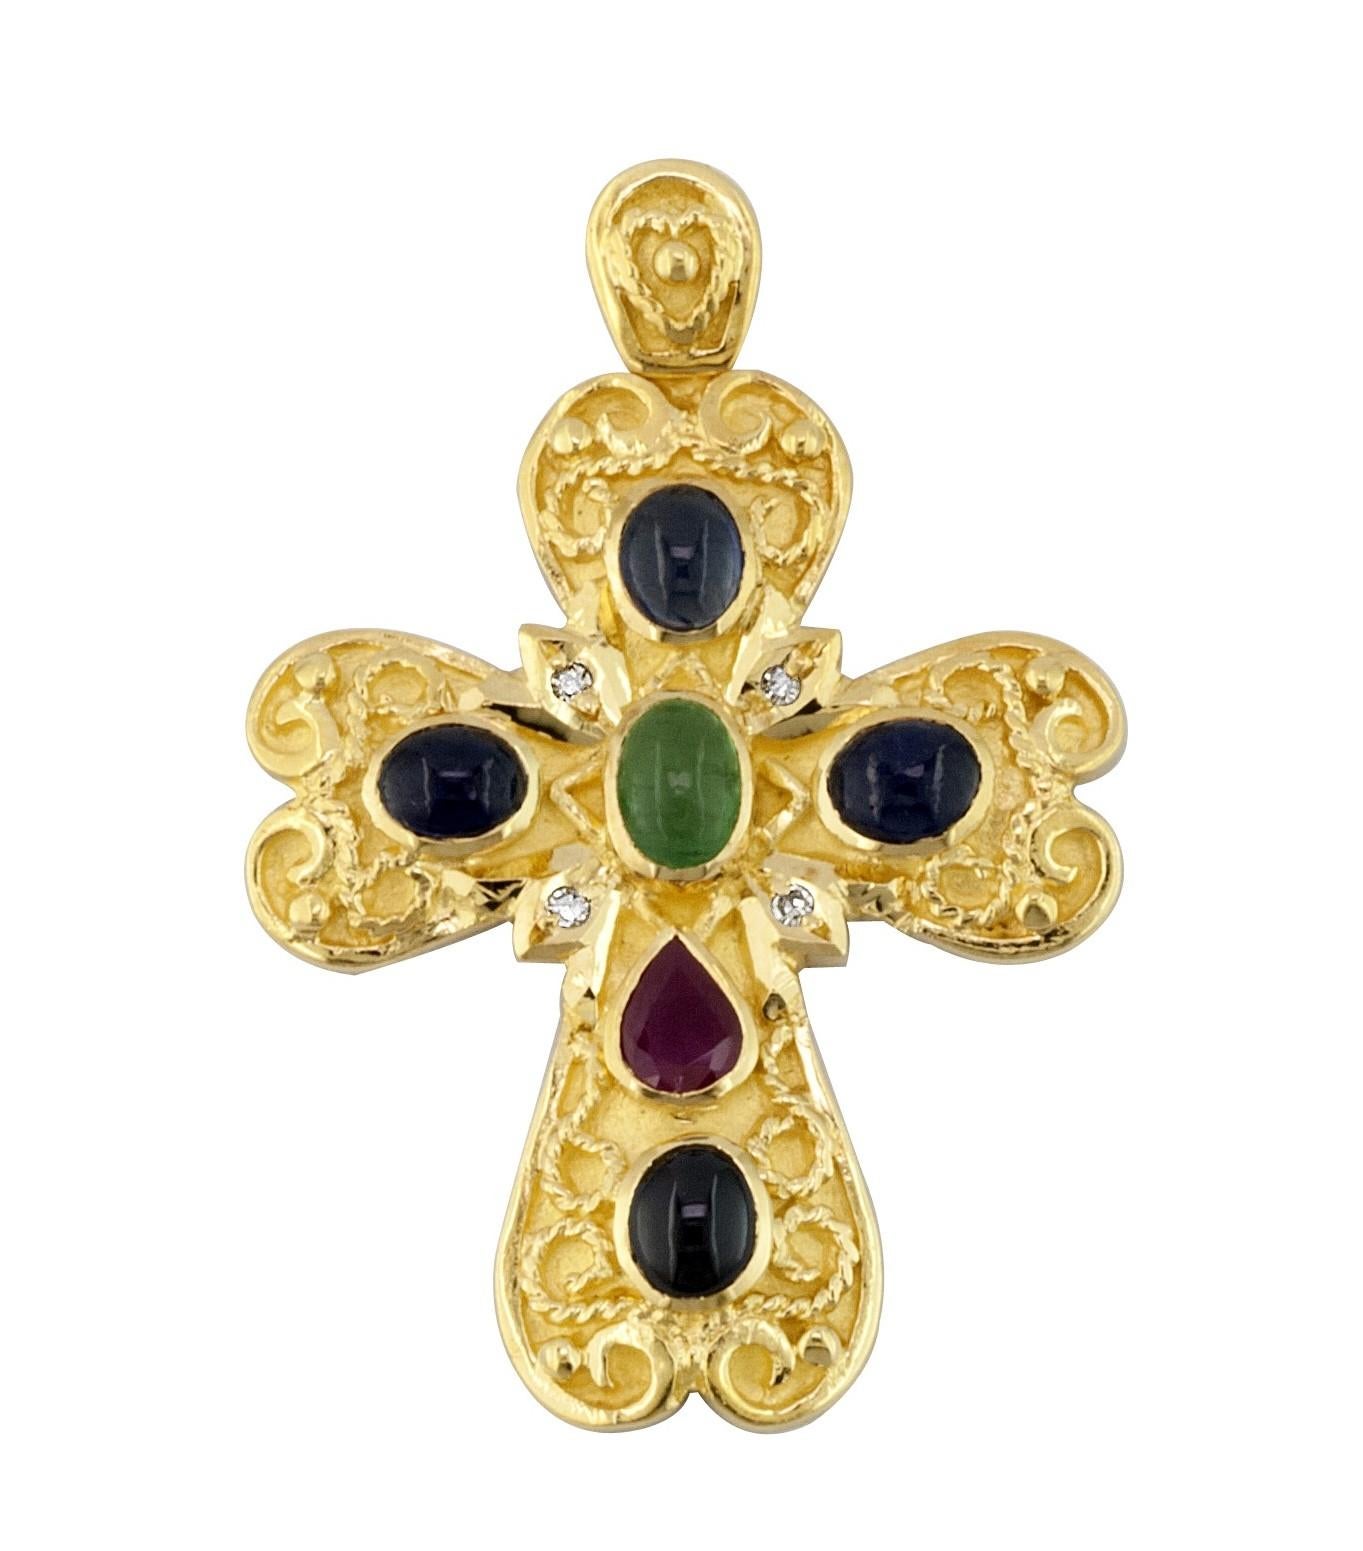 S.Georgios Byzantine Style Cross is handmade from solid 18 Karat Yellow Gold and has Granulation work and a beautiful matt finish. It features Diamonds total weight of 0,06 Carats, and a Ruby, an Emerald, and Sapphires all total weight of 2,60